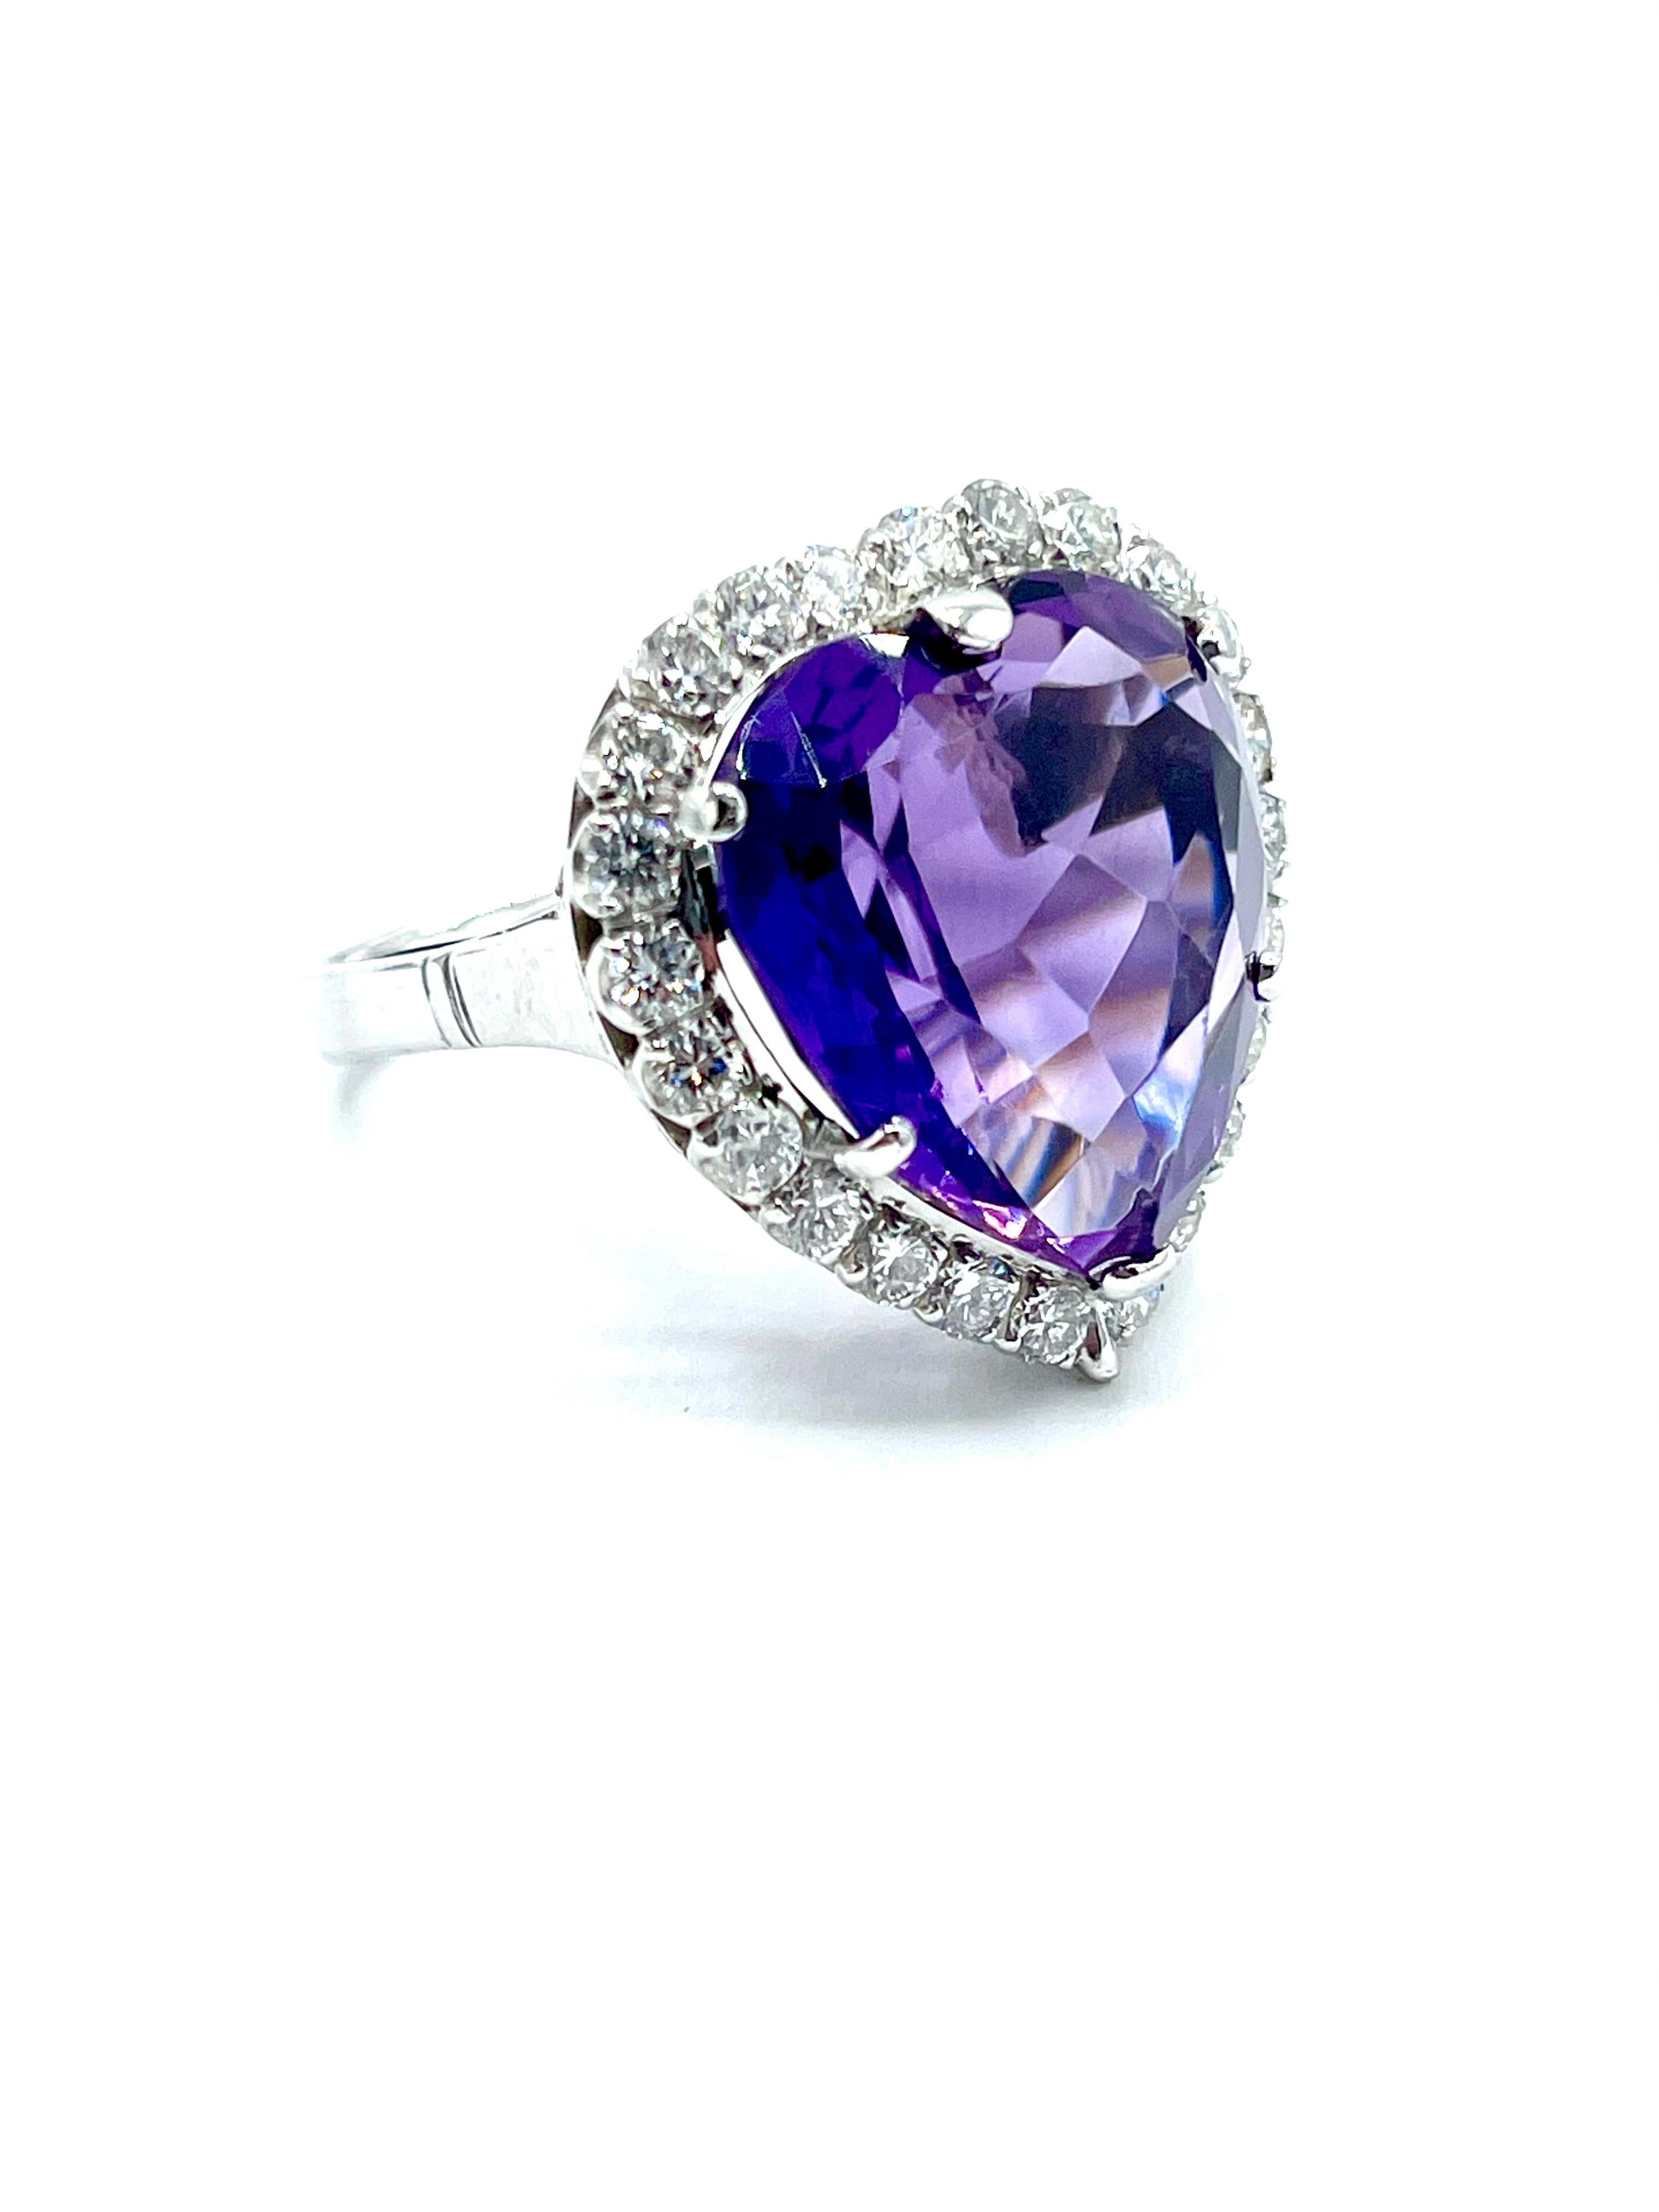 Heart Cut 12.88 Carat Heart Shape Amethyst and Diamond Ring For Sale